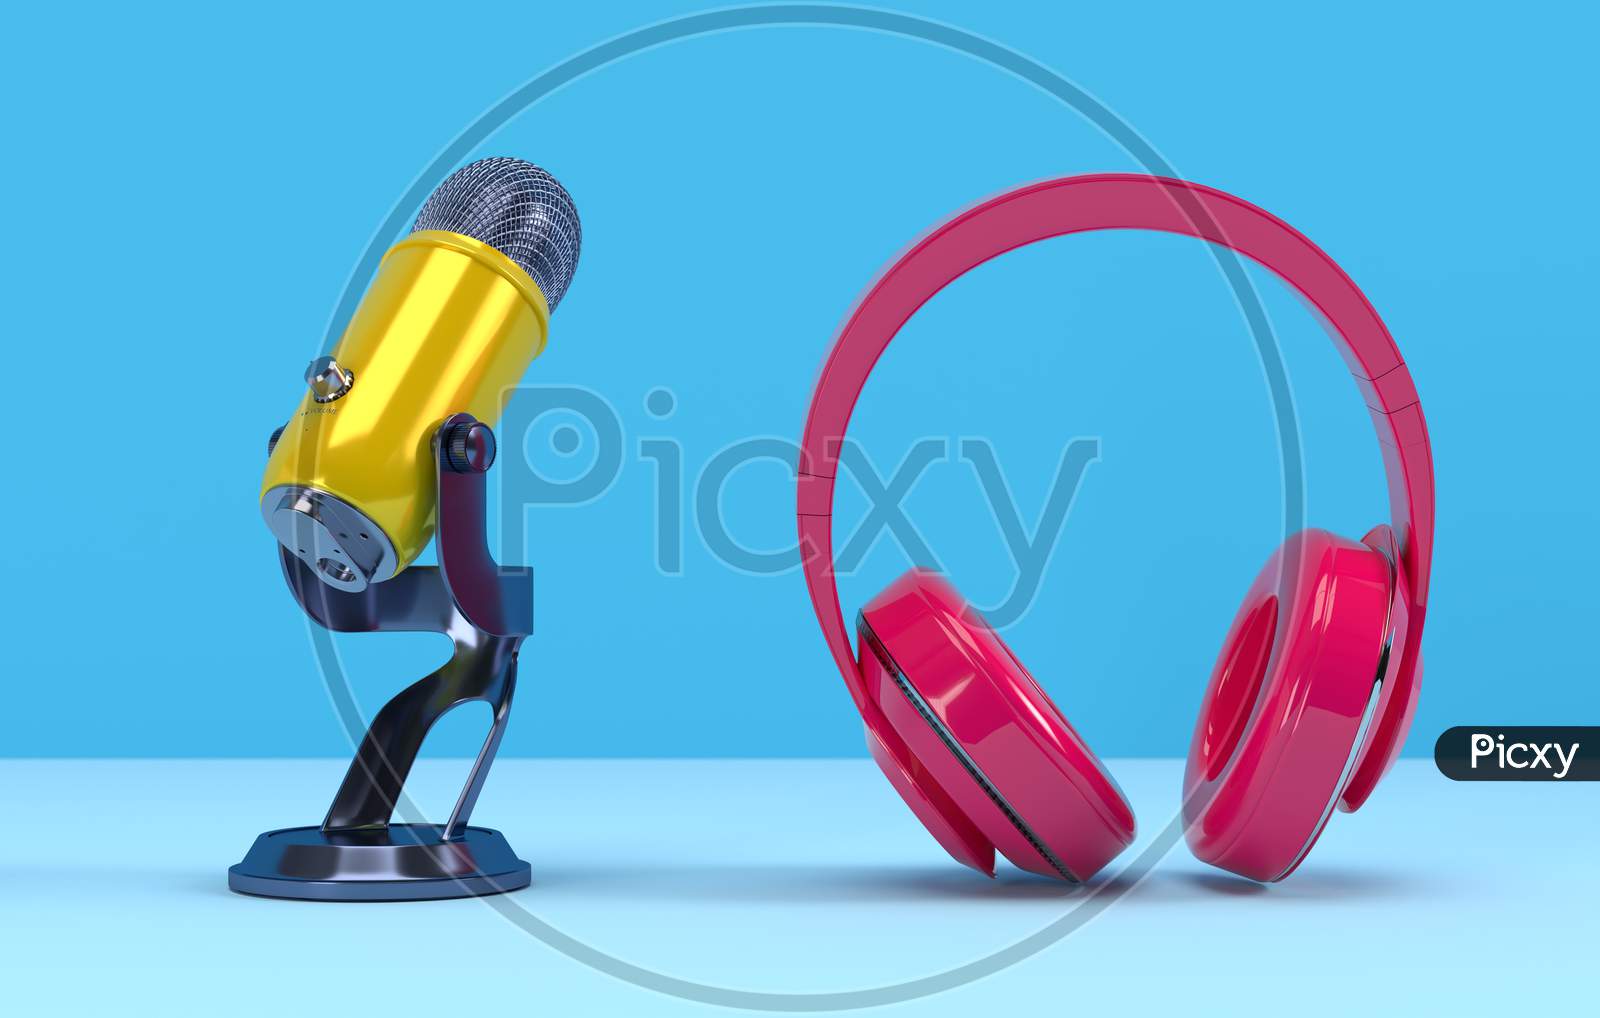 Yellow Podcast Microphone And Pink Headphone On Blue Background. Entertainment And Online Video Conference Concept. 3D Illustration Rendering